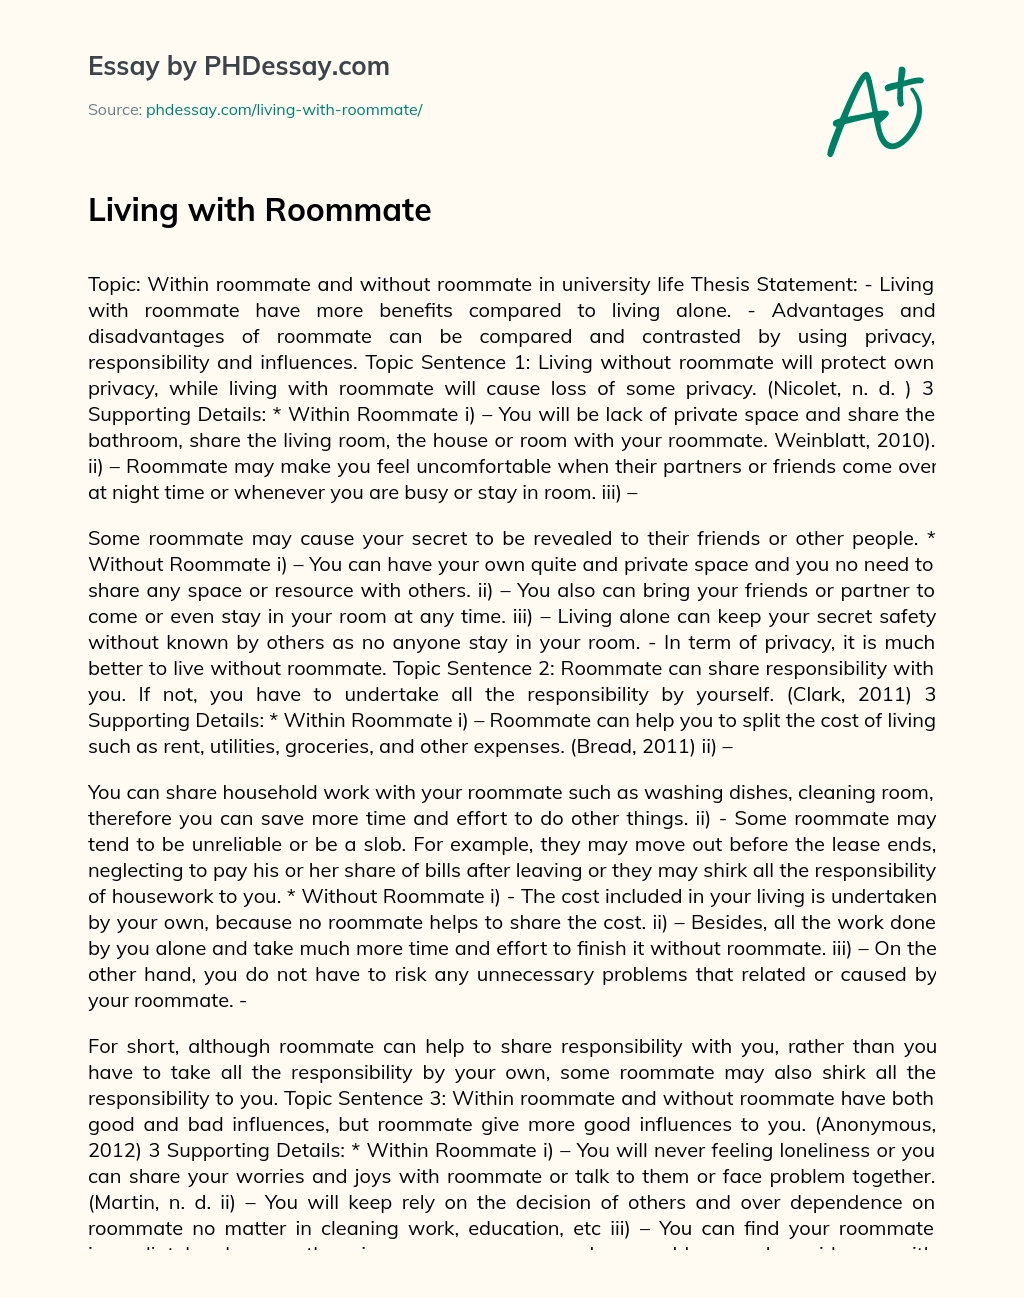 Living With Roommate essay